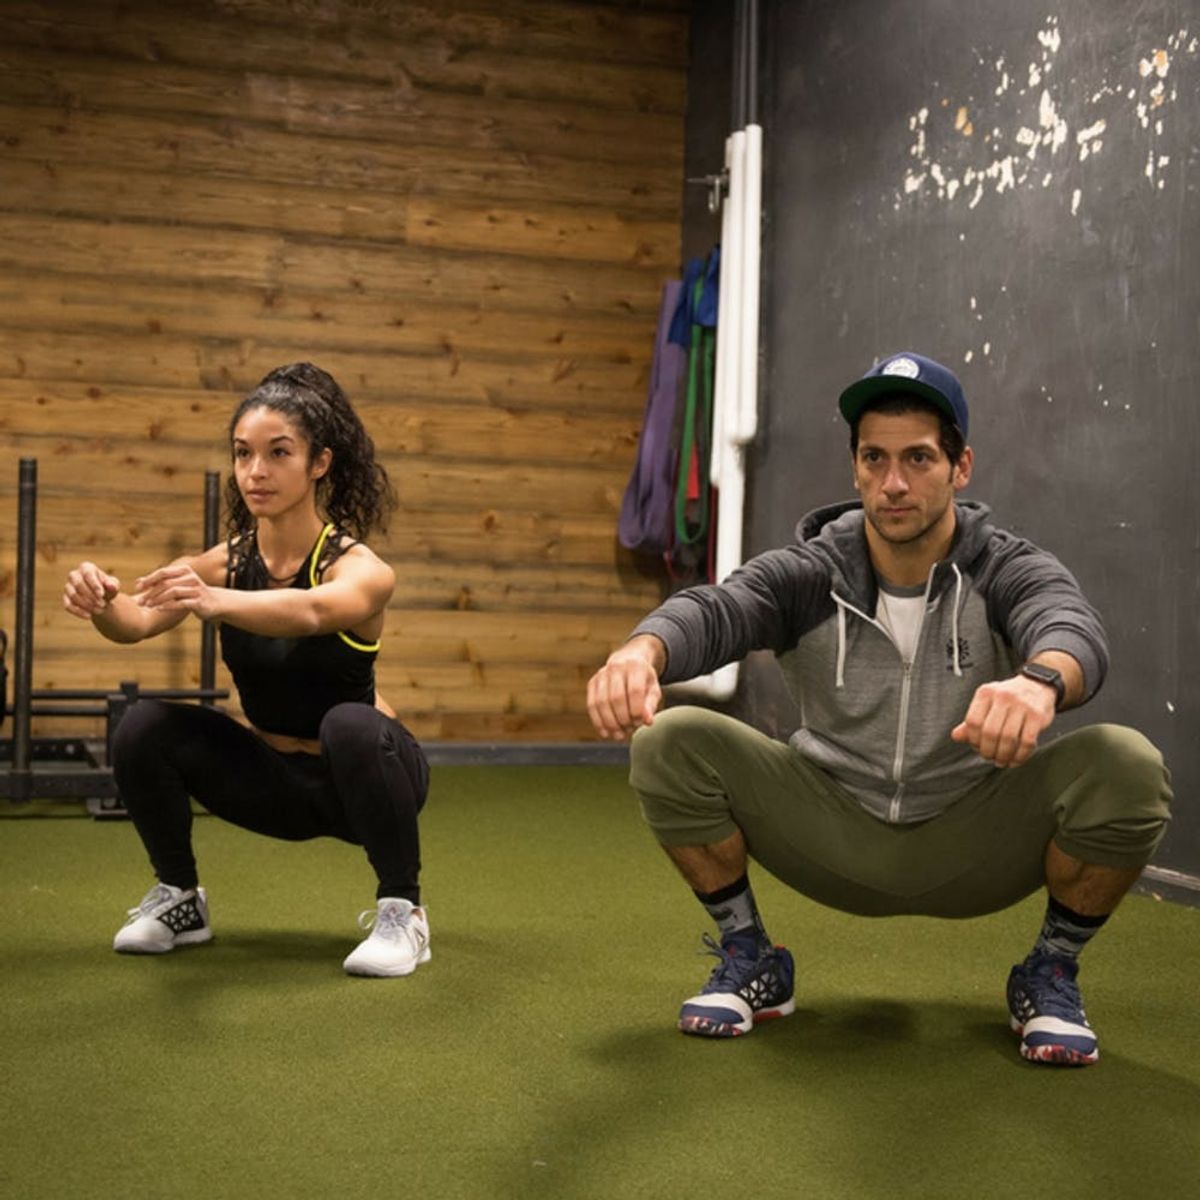 Cuffing Season Is Here + We Have the Workouts for You and Your New Boo